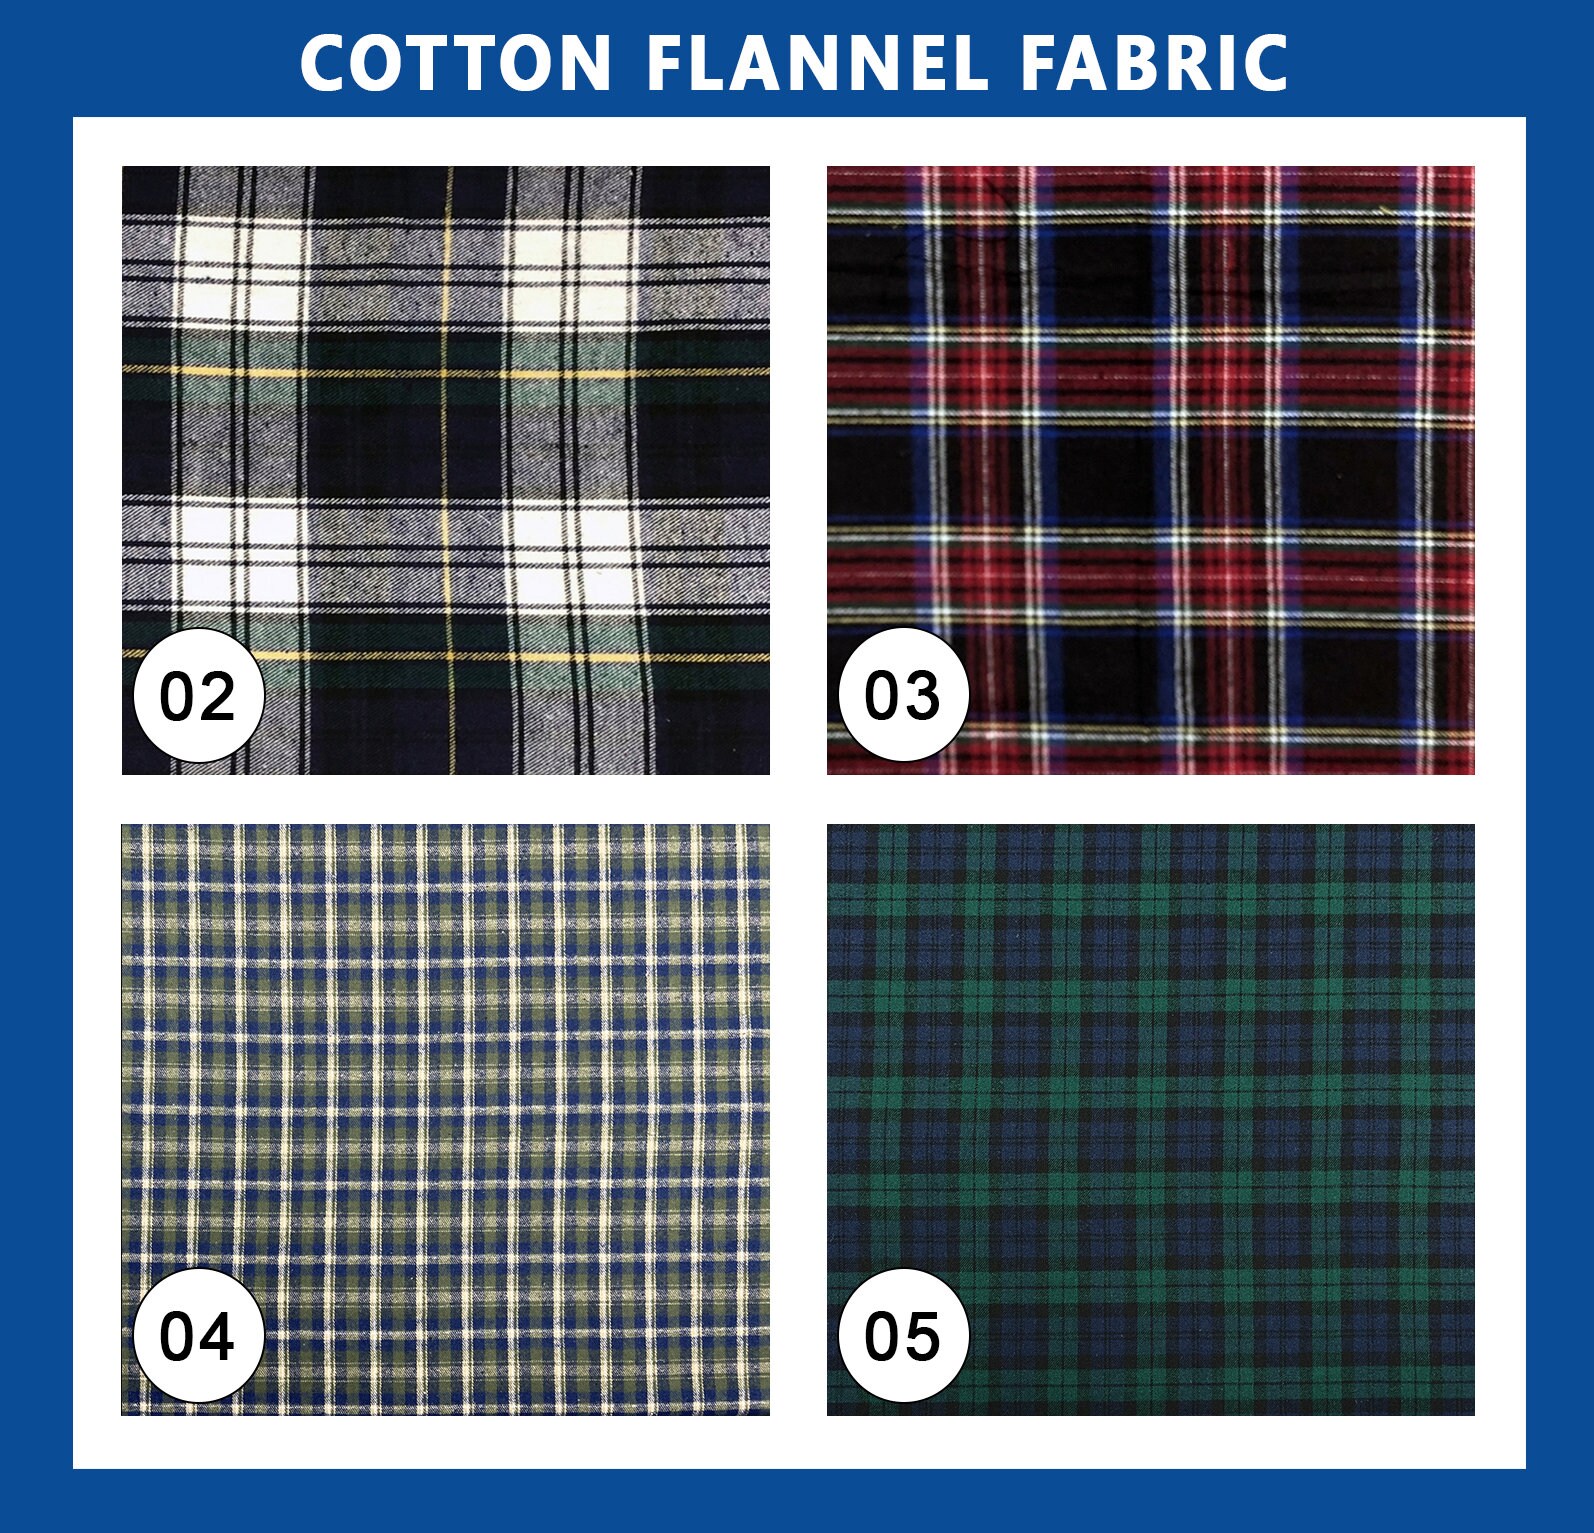 100% Cotton Tartan Plaid Flannel Fabric Sold by the Yard and Bolt Ideal for  Shirts, Scarves, Pajamas & Blankets 